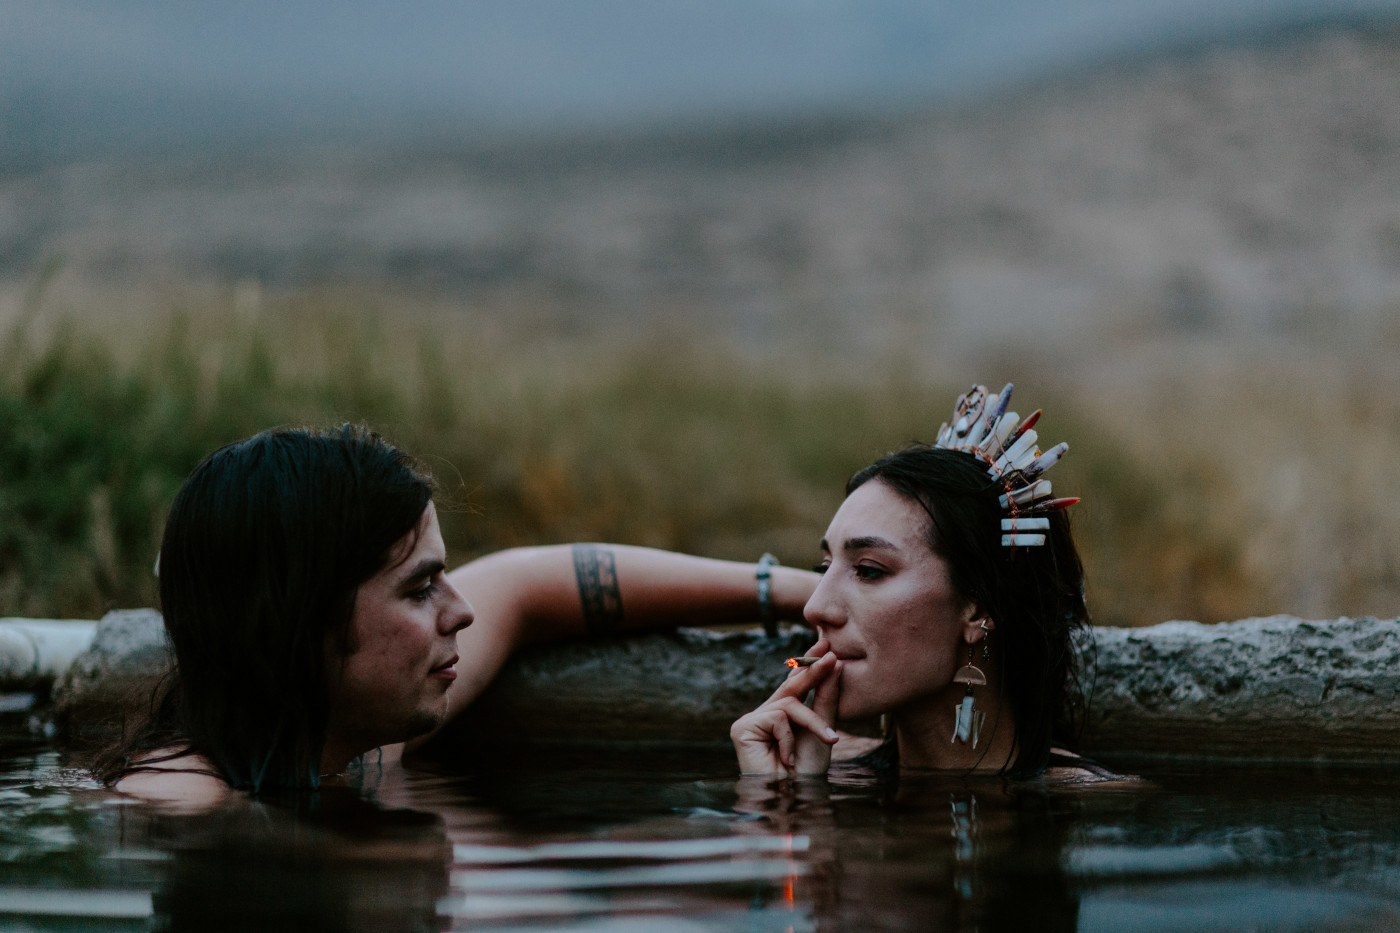 Emerald and Cameron share a joint in the Alvord Desert hot spring at dusk.